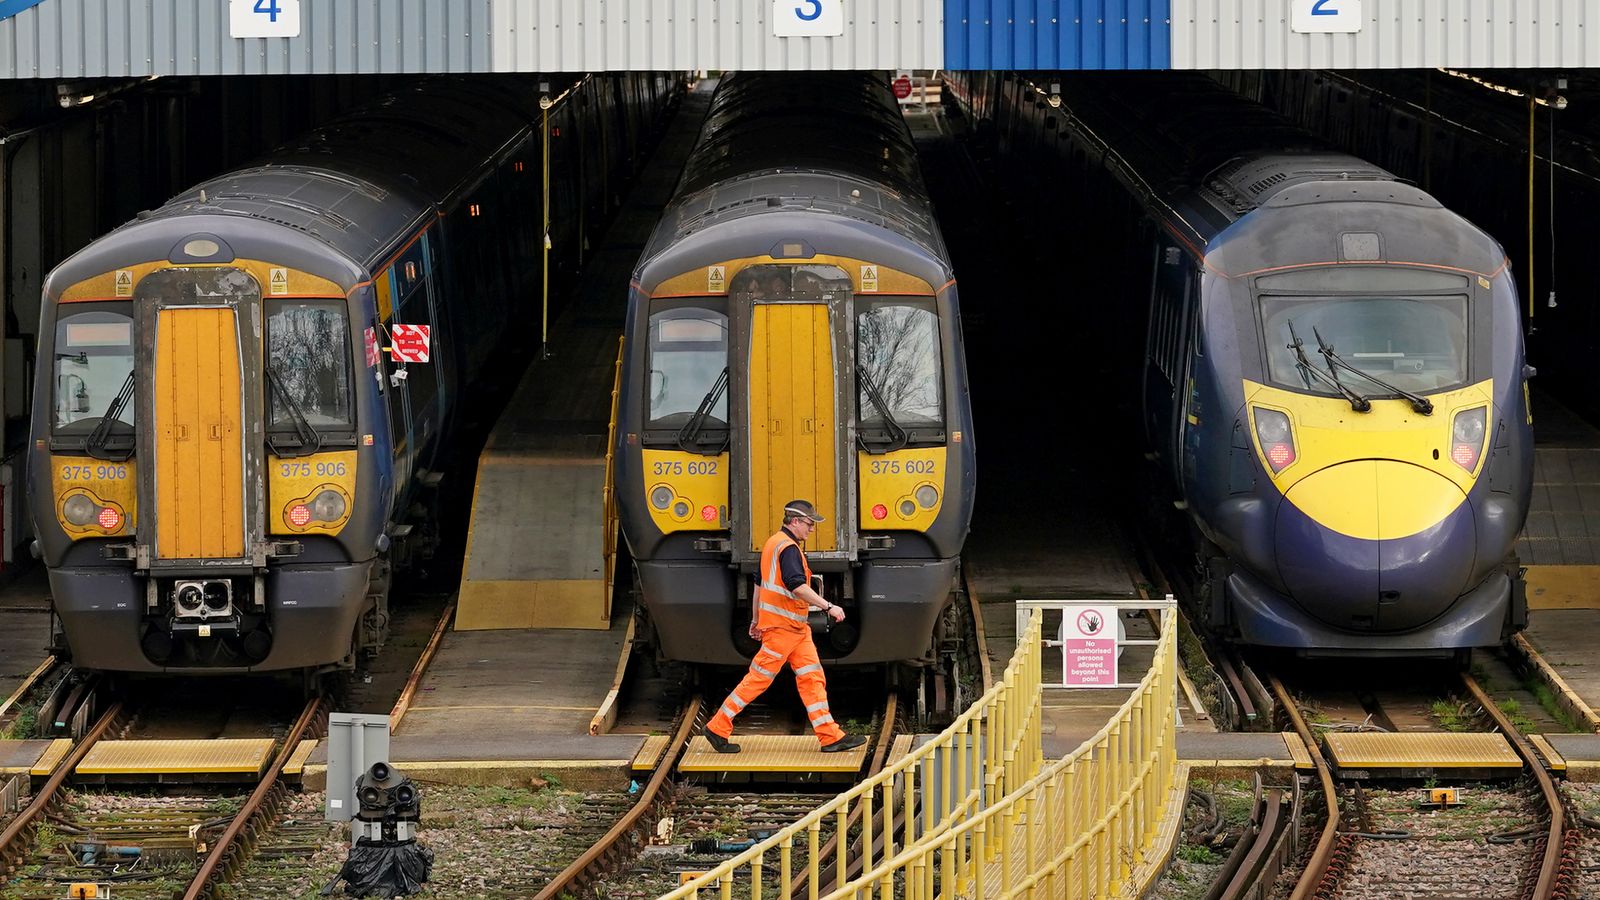 Evidence suggests government seeking conflict over rail strike - but a window has still opened for a deal